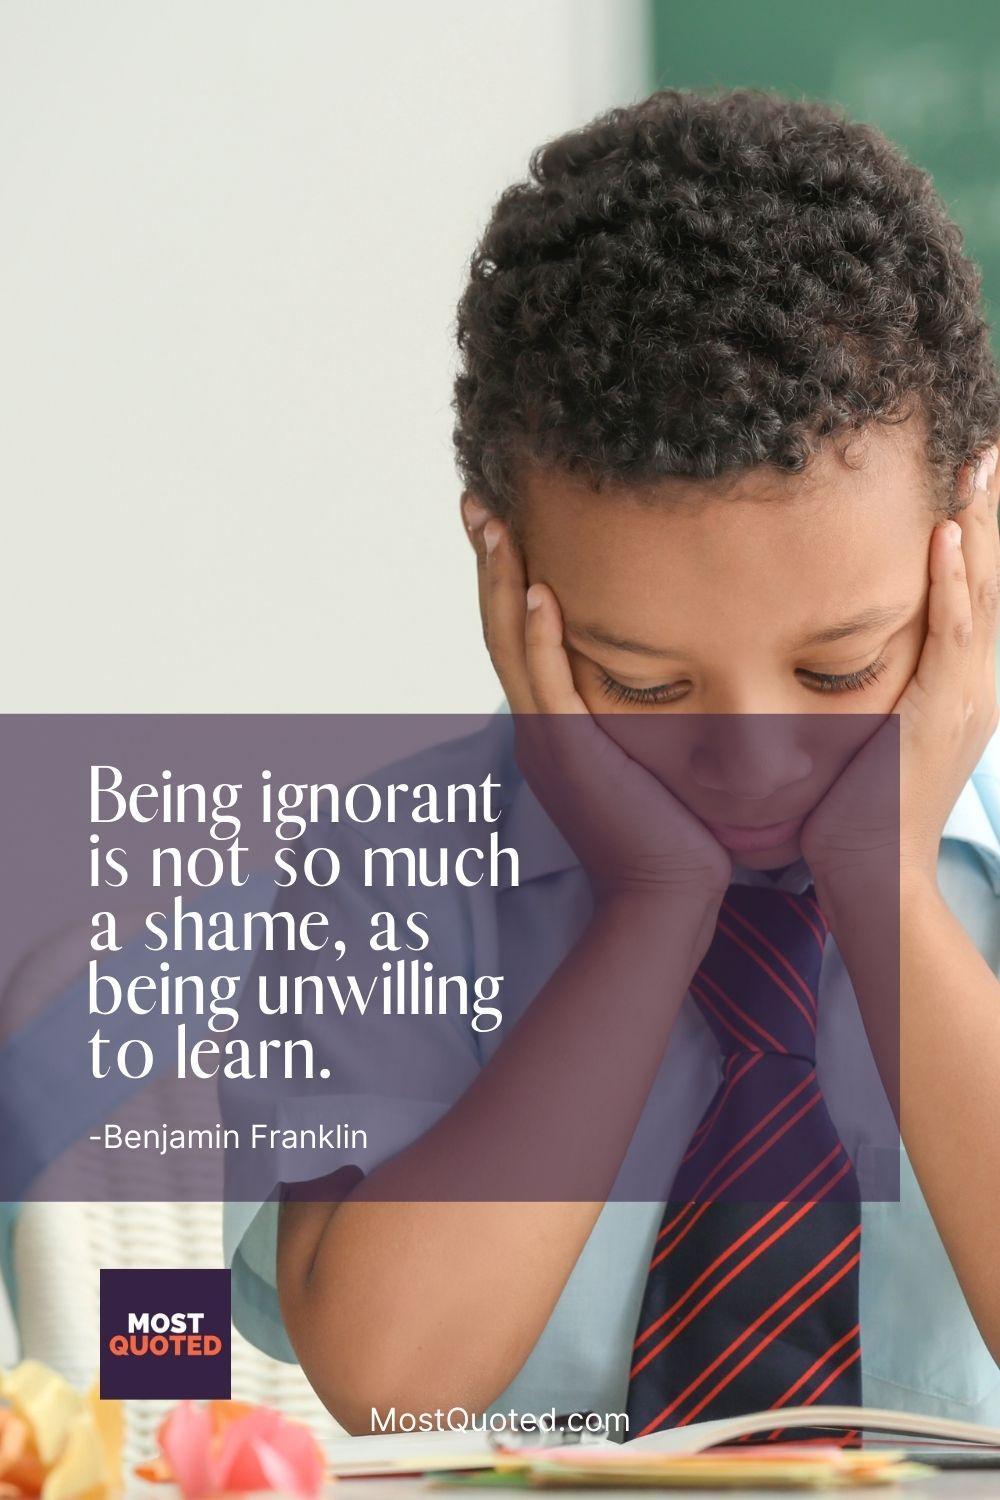 Being ignorant is not so much a shame, as being unwilling to learn. - Benjamin Franklin